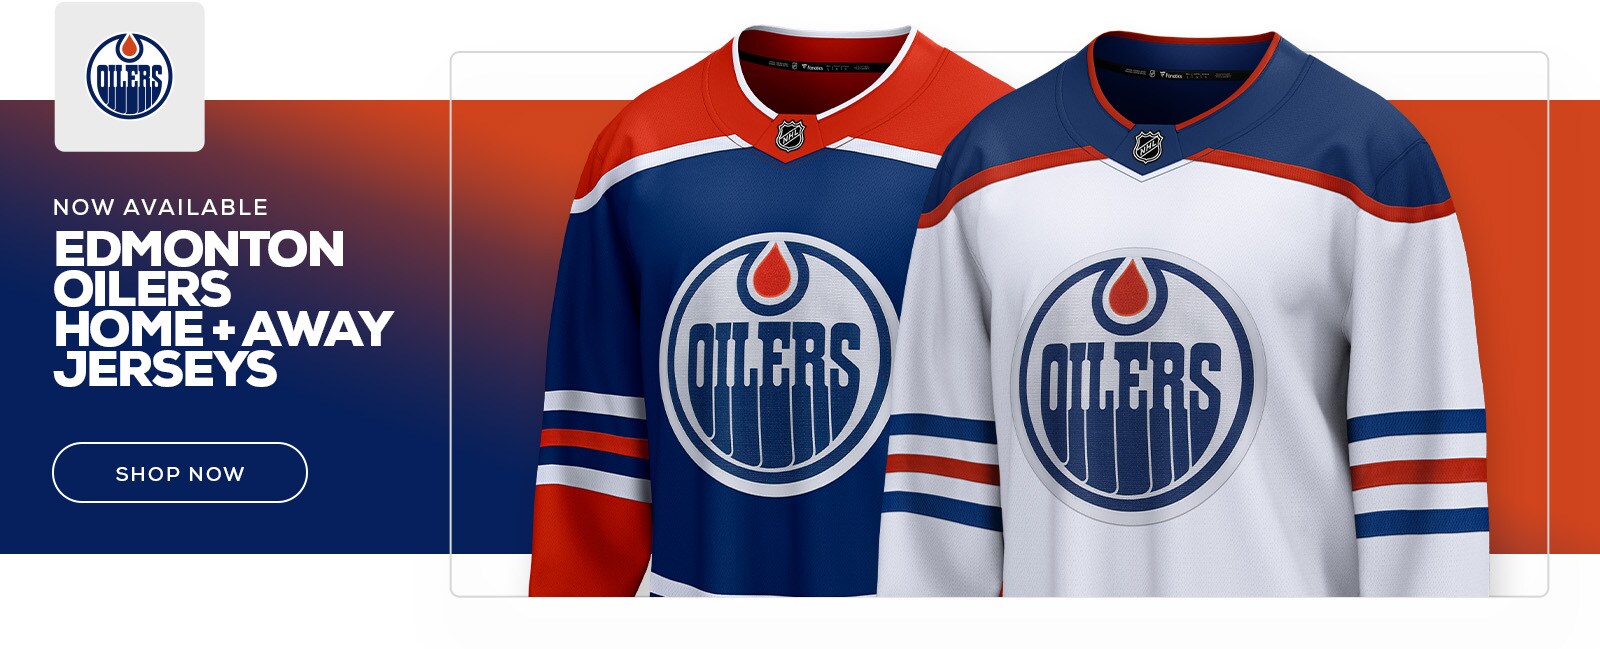 NOW AVAILABLE. EDMONTON OILERS HOME + AWAY JERSEYS. SHOP NOW